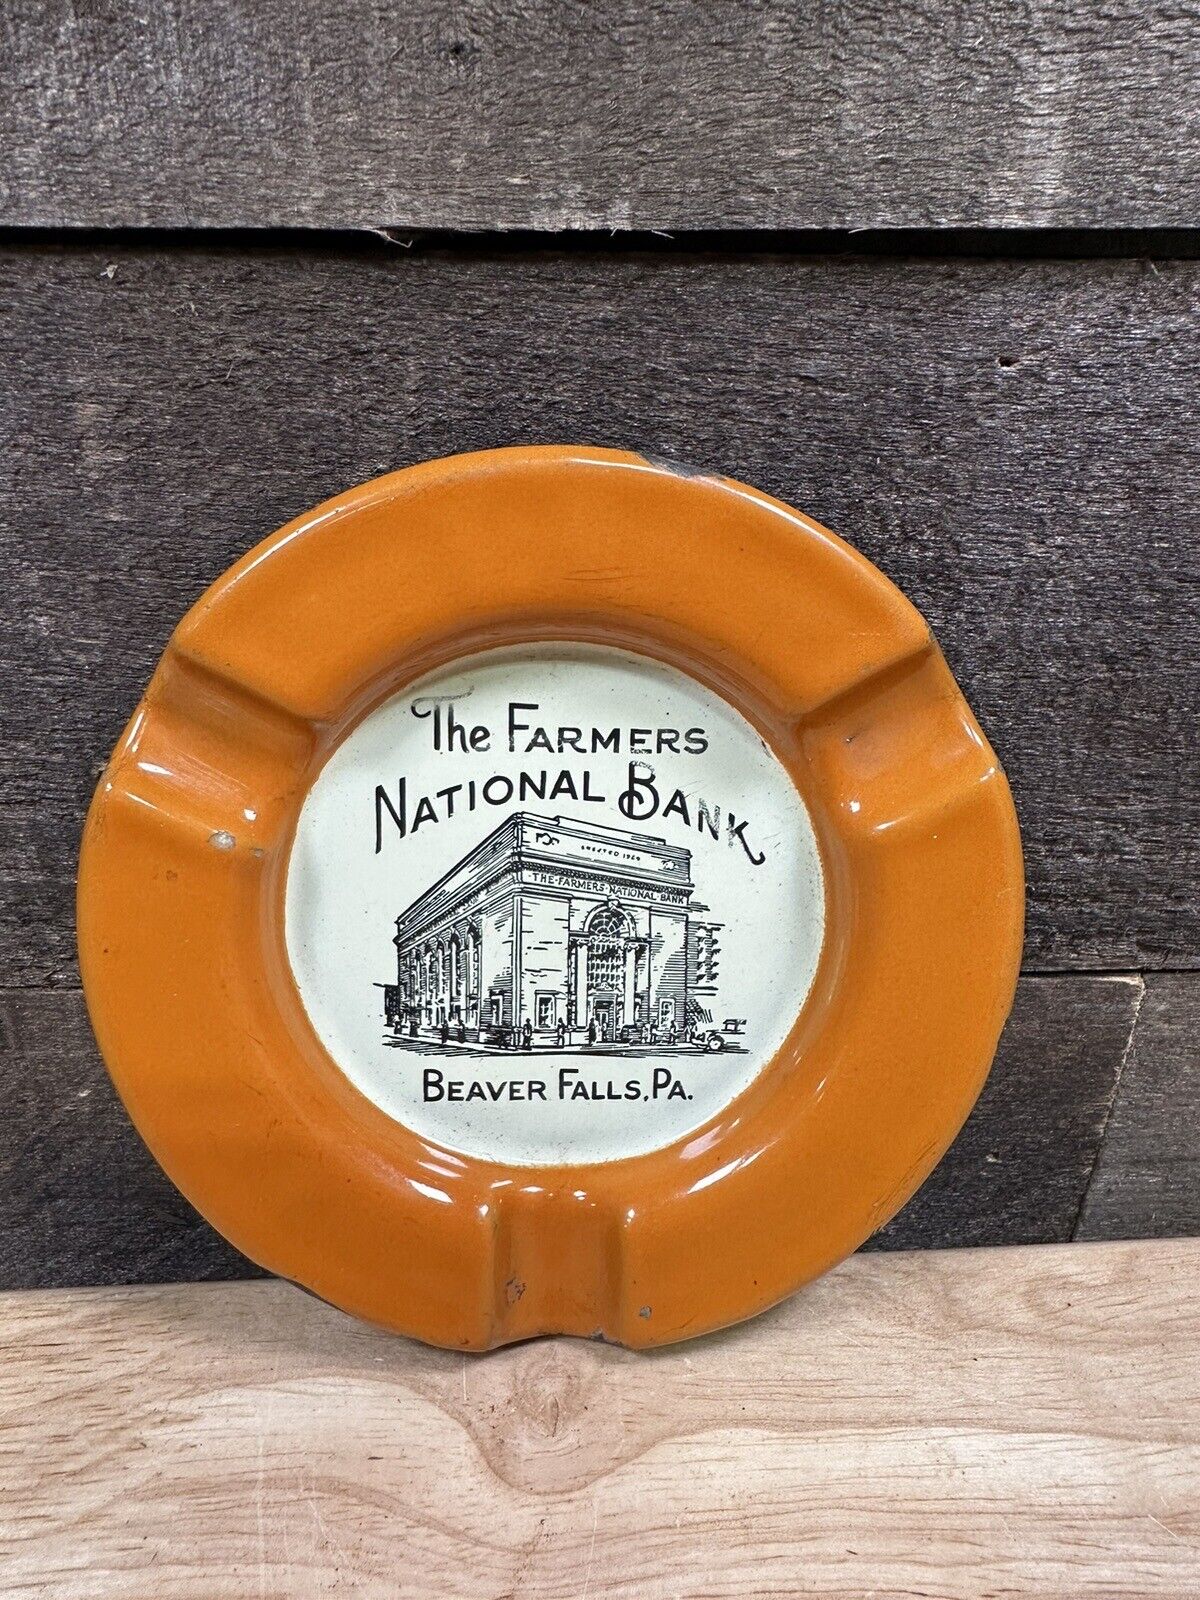 Antique ING-RICH Porcelain “The Farmers National Bank” Ashtray